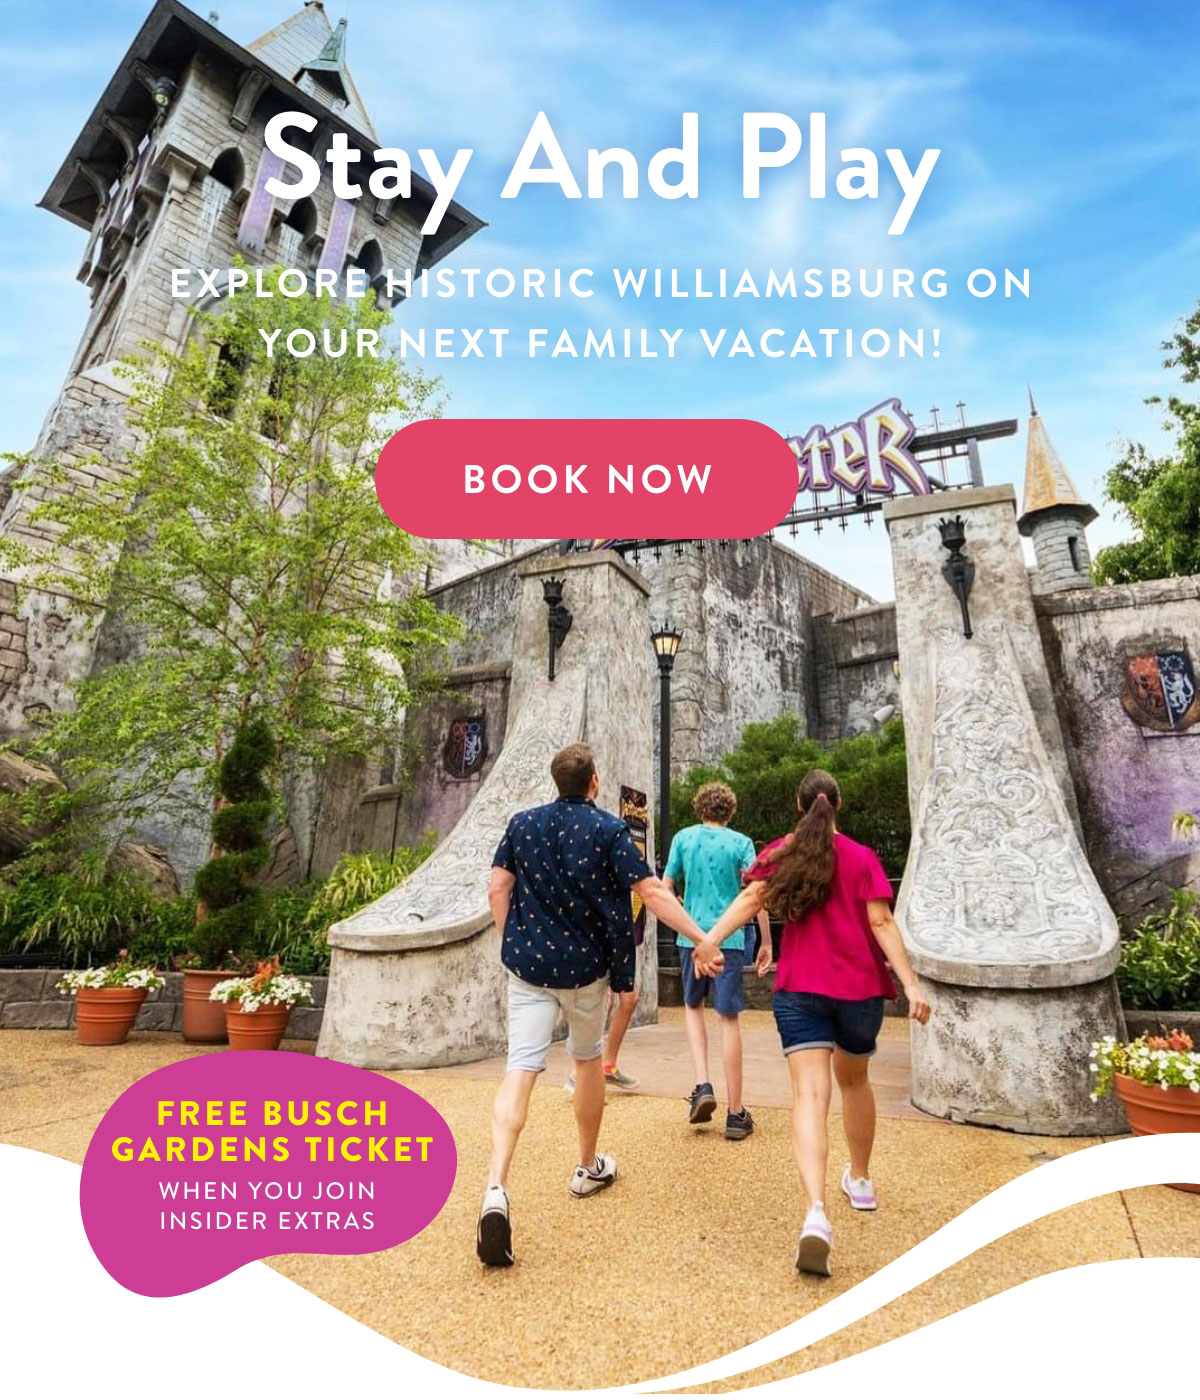 Stay and Play | Explore historic Williamsburg on your next family vacation! Book now